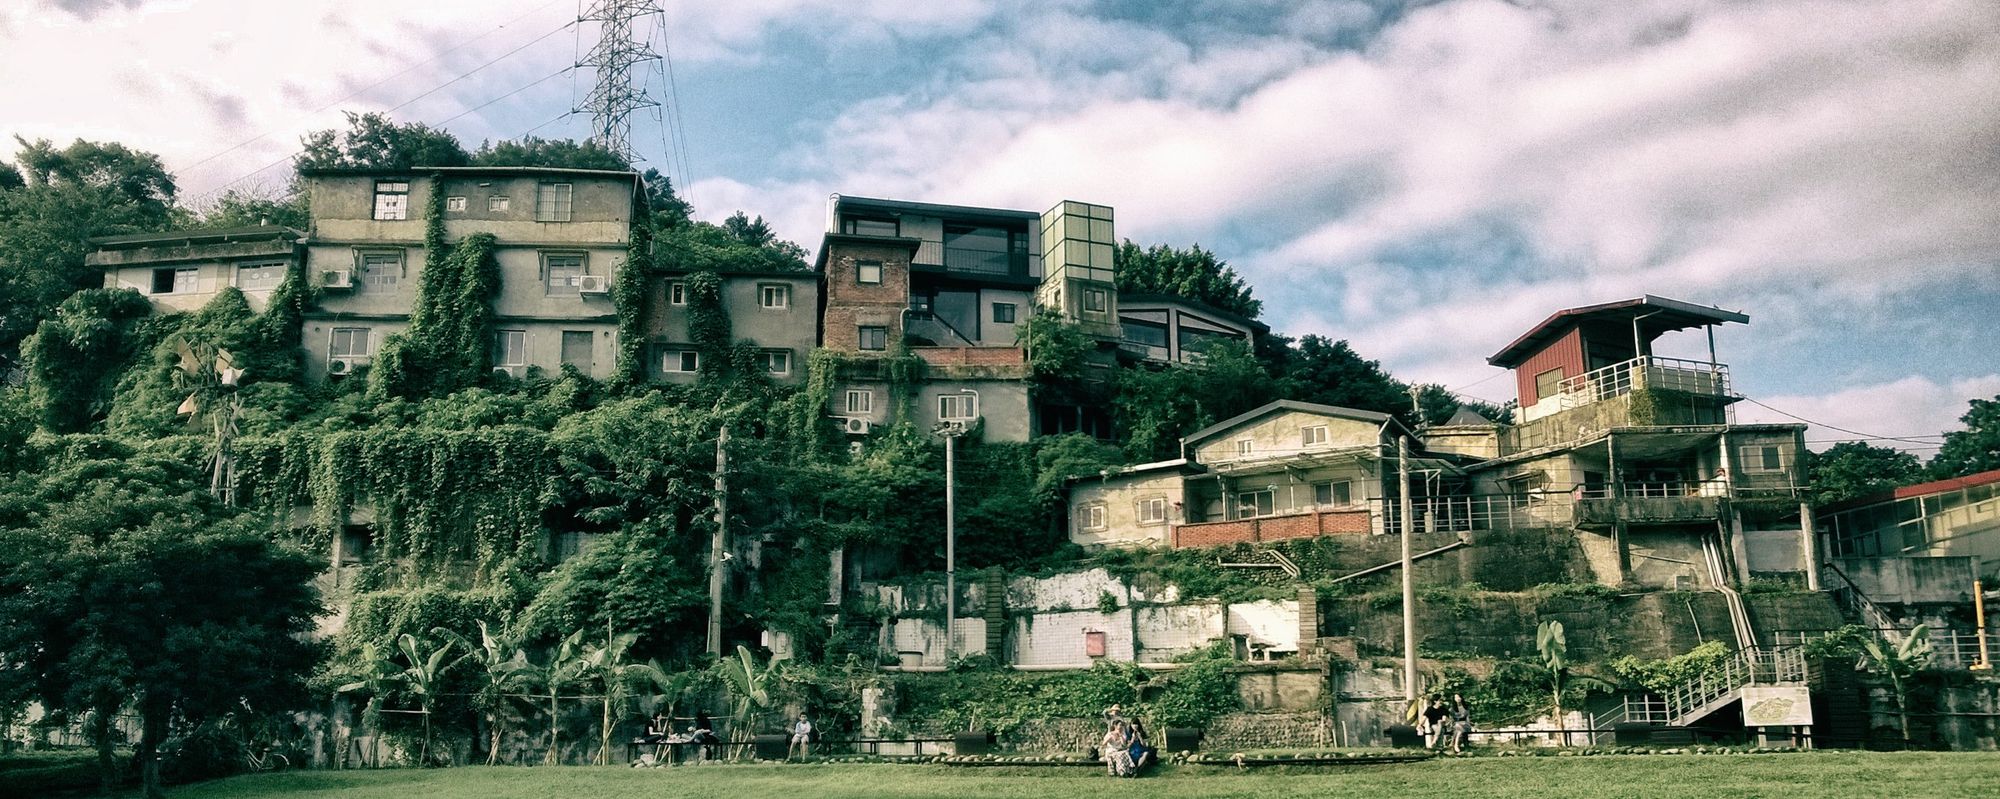 The City of the Future Looks Like a Former Military Bunker in Taipei